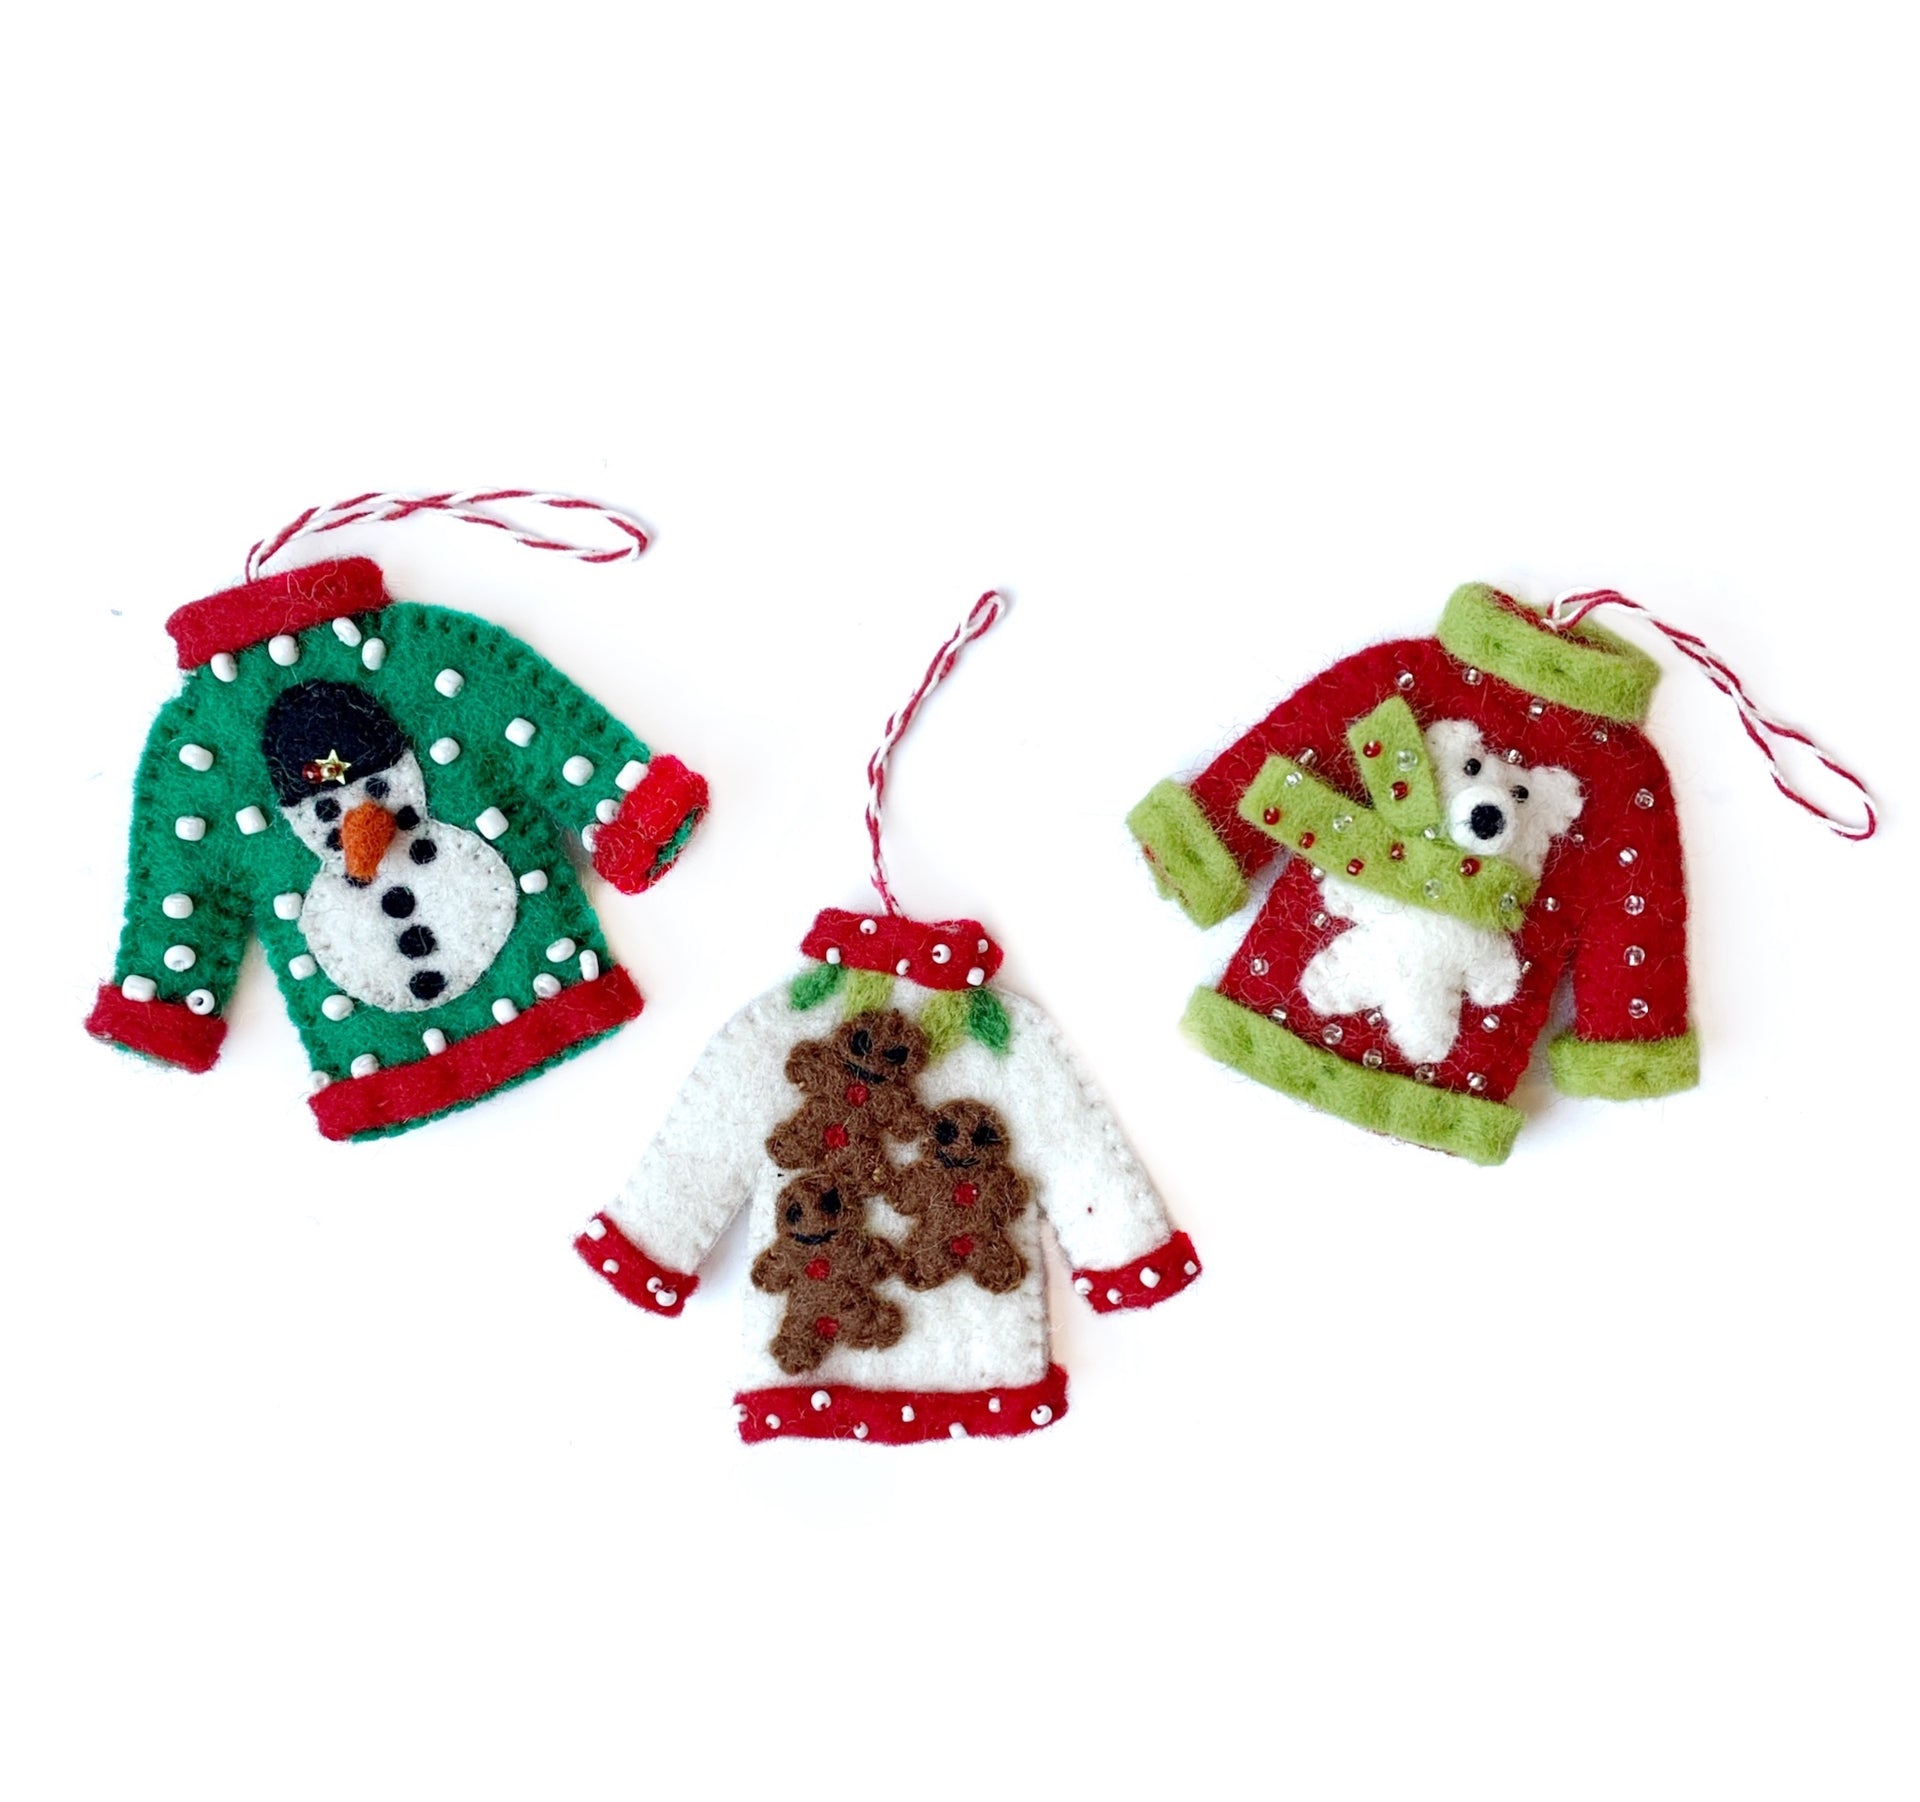 Ugly Christmas Sweater Ornament Set by Ornaments for Orphans